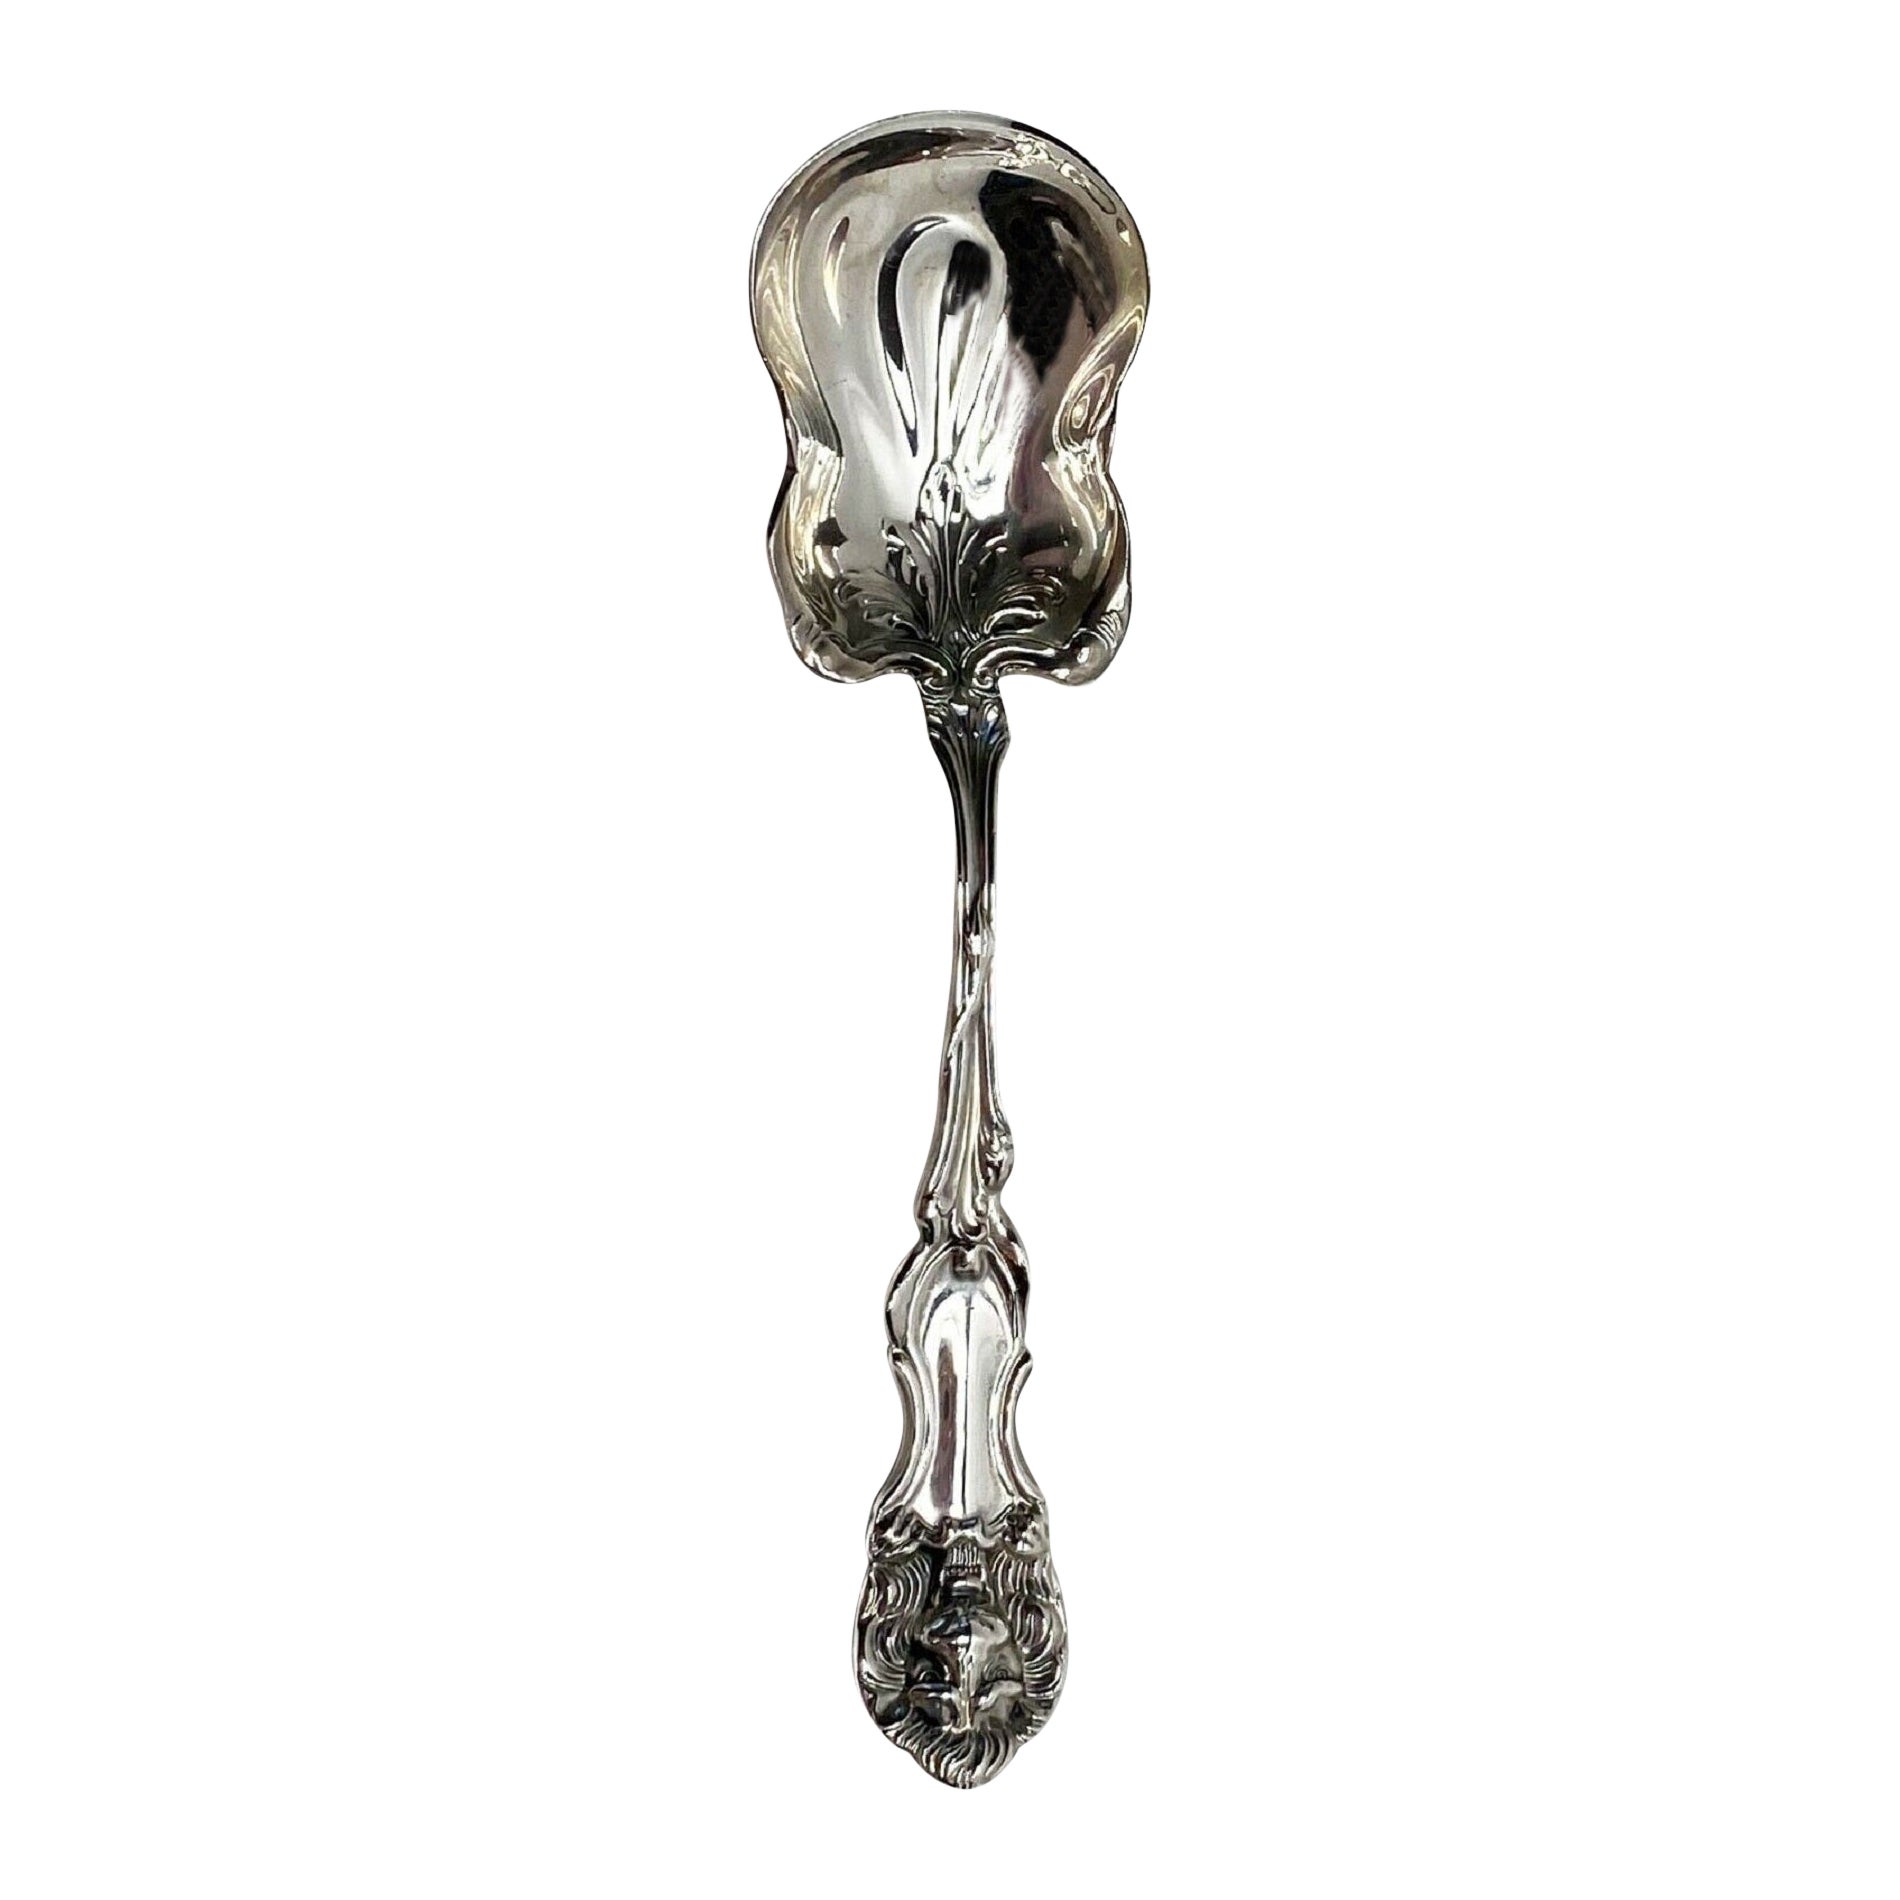 Wallace Sterling Silver Art Nouveau Jam or Berry Spoon